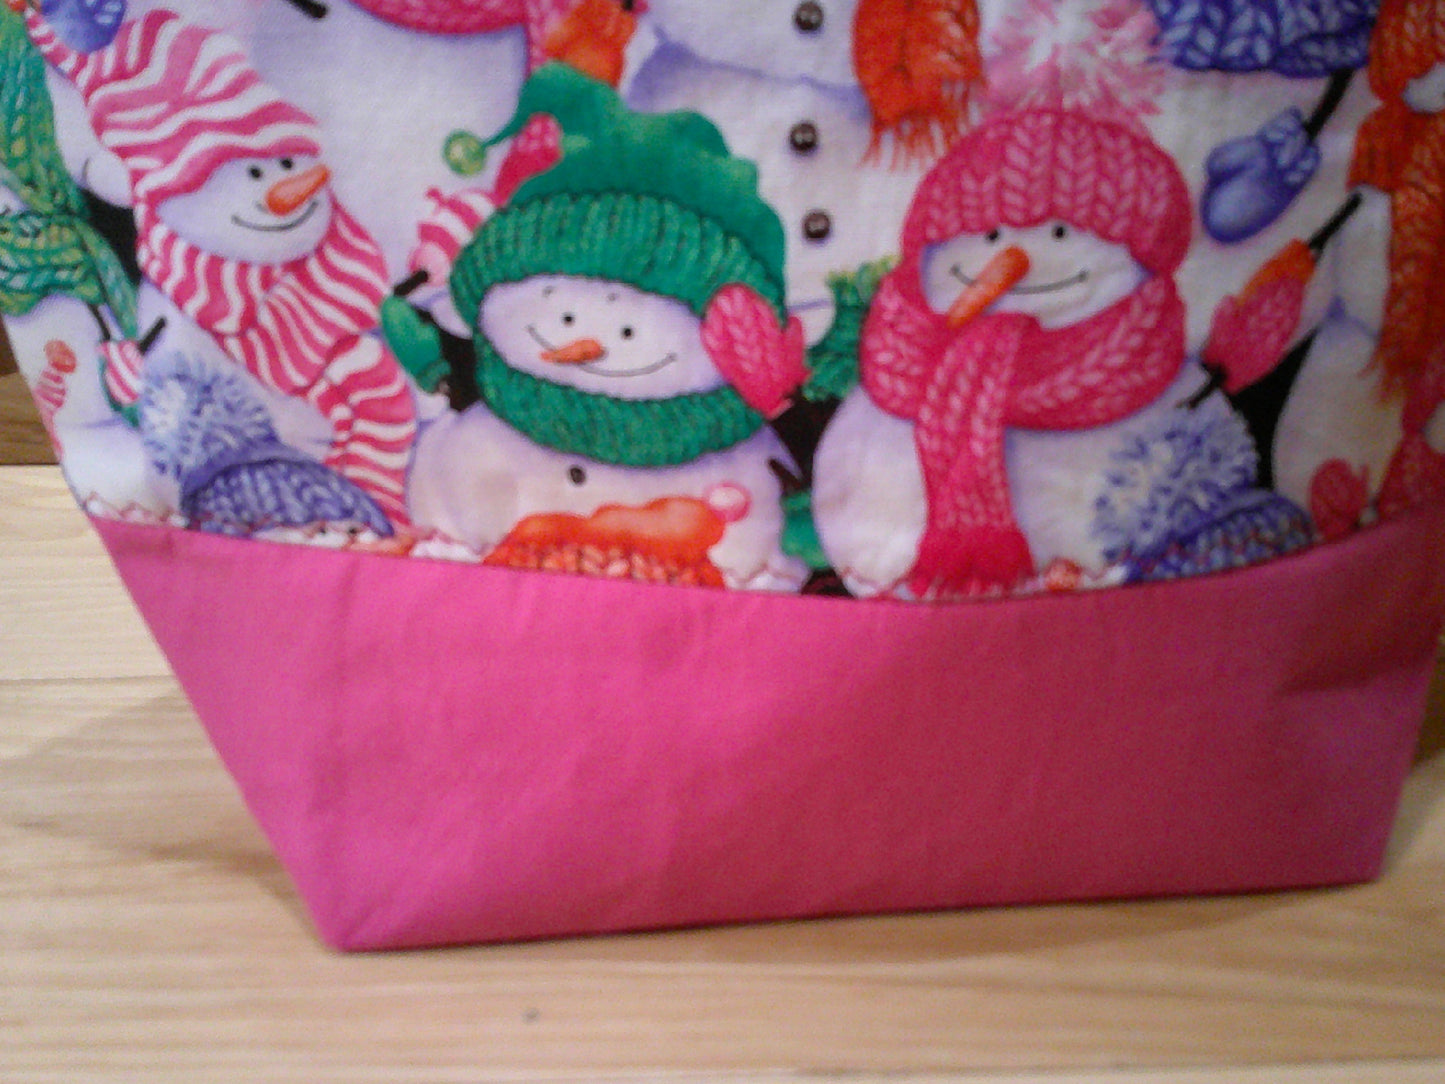 Snowman w/ colored scarves project bags